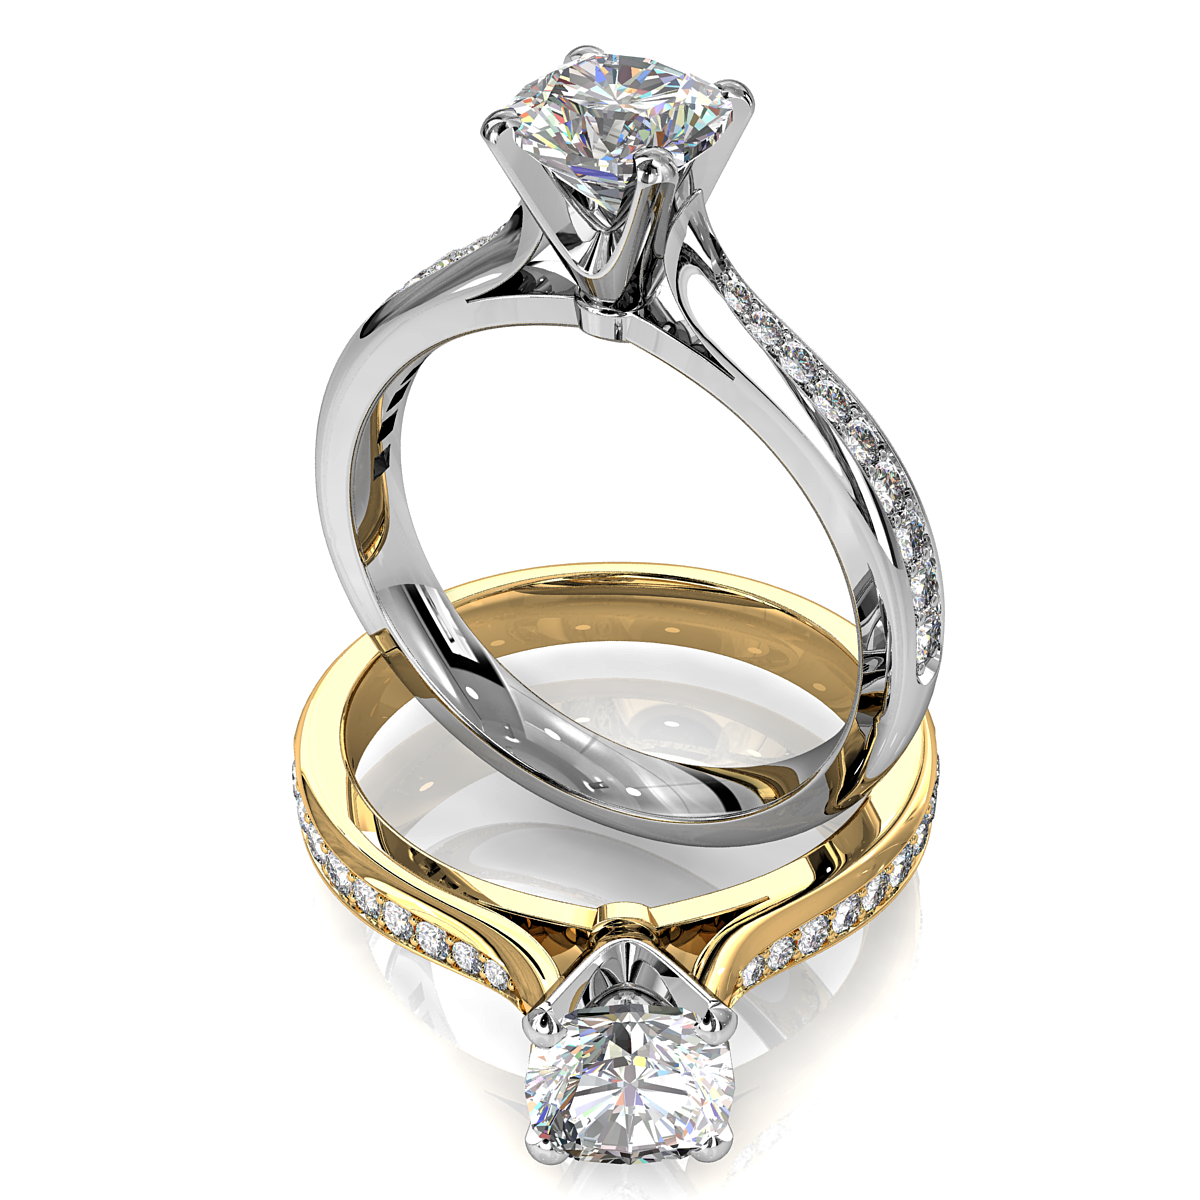 Asscher Cut Solitaire Diamond Engagement Ring, 4 Claw Set on a Tapered Bead Set Band with a Classic Underrail Setting.